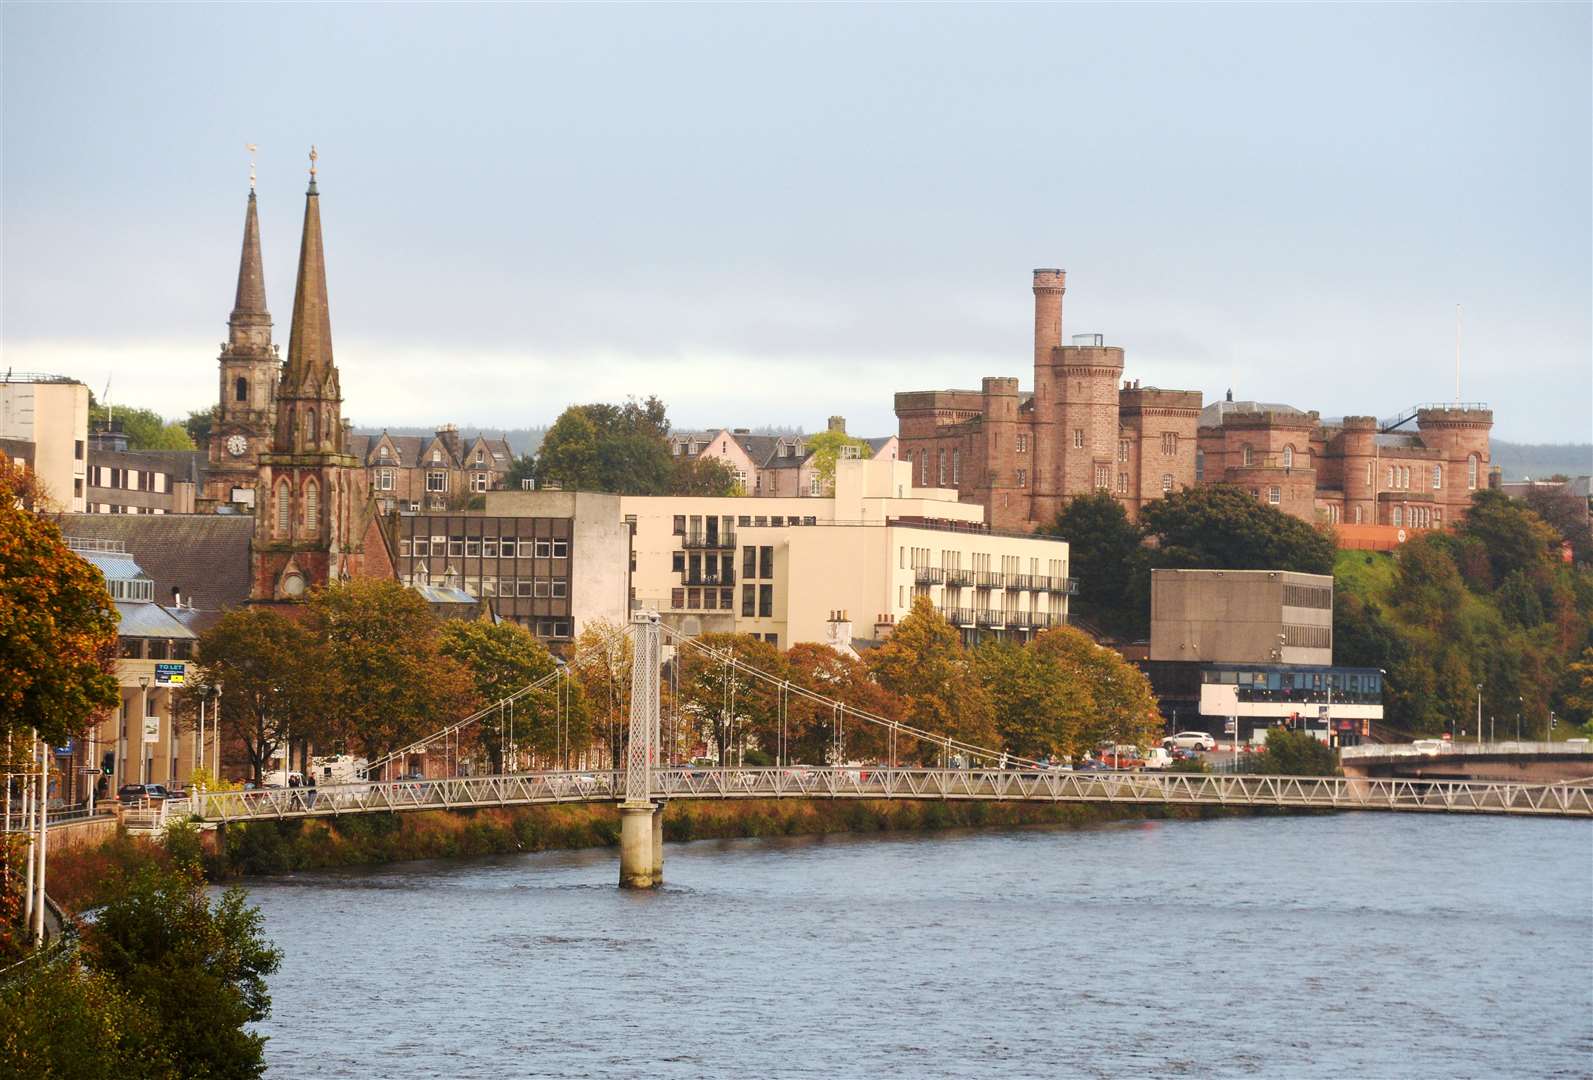 Inverness city centre and the River Ness.